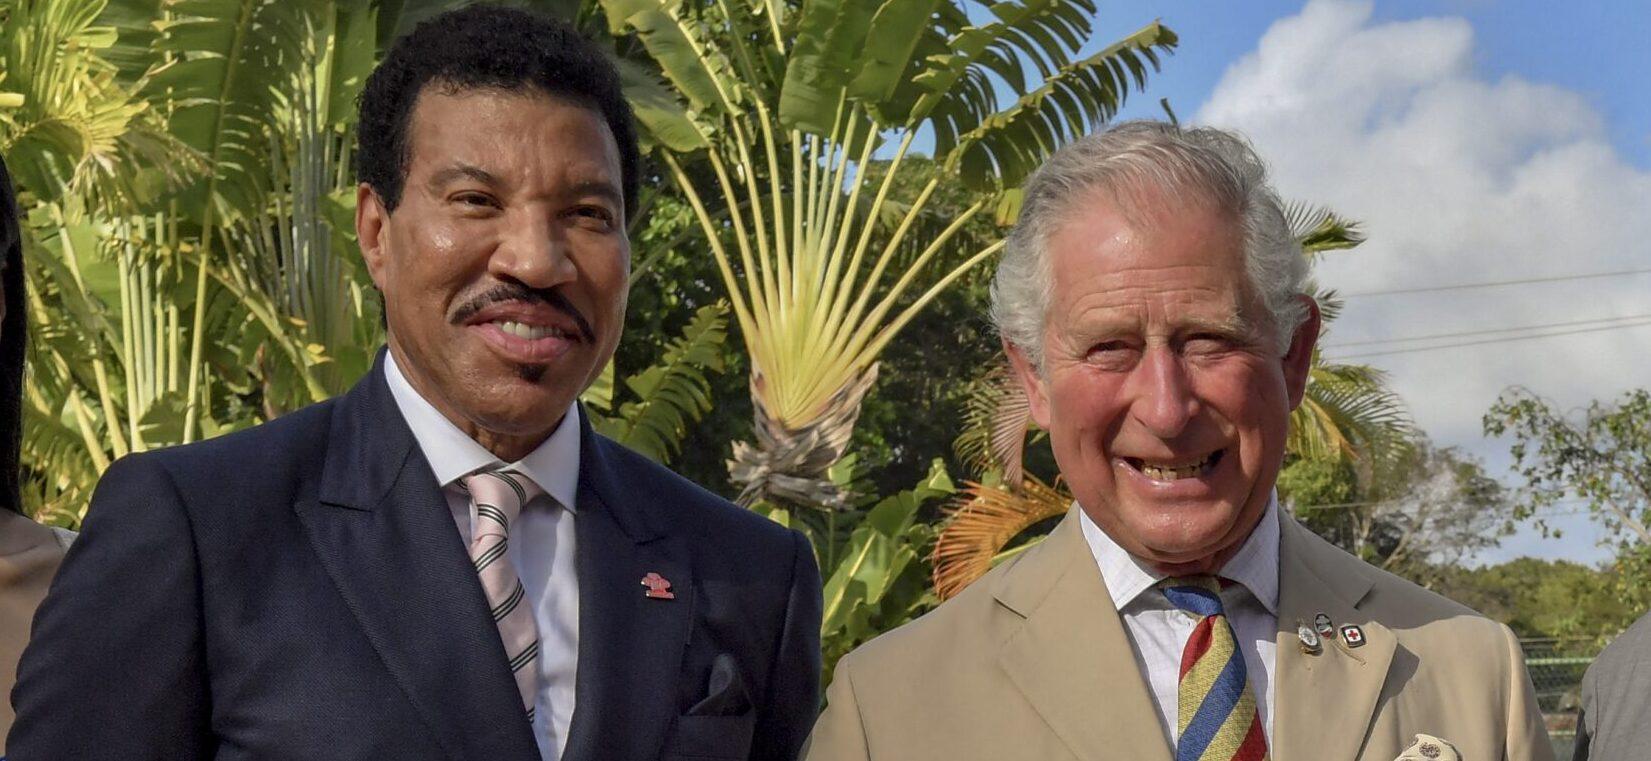 Lionel Richie and King Charles at the Prince's Trust International reception